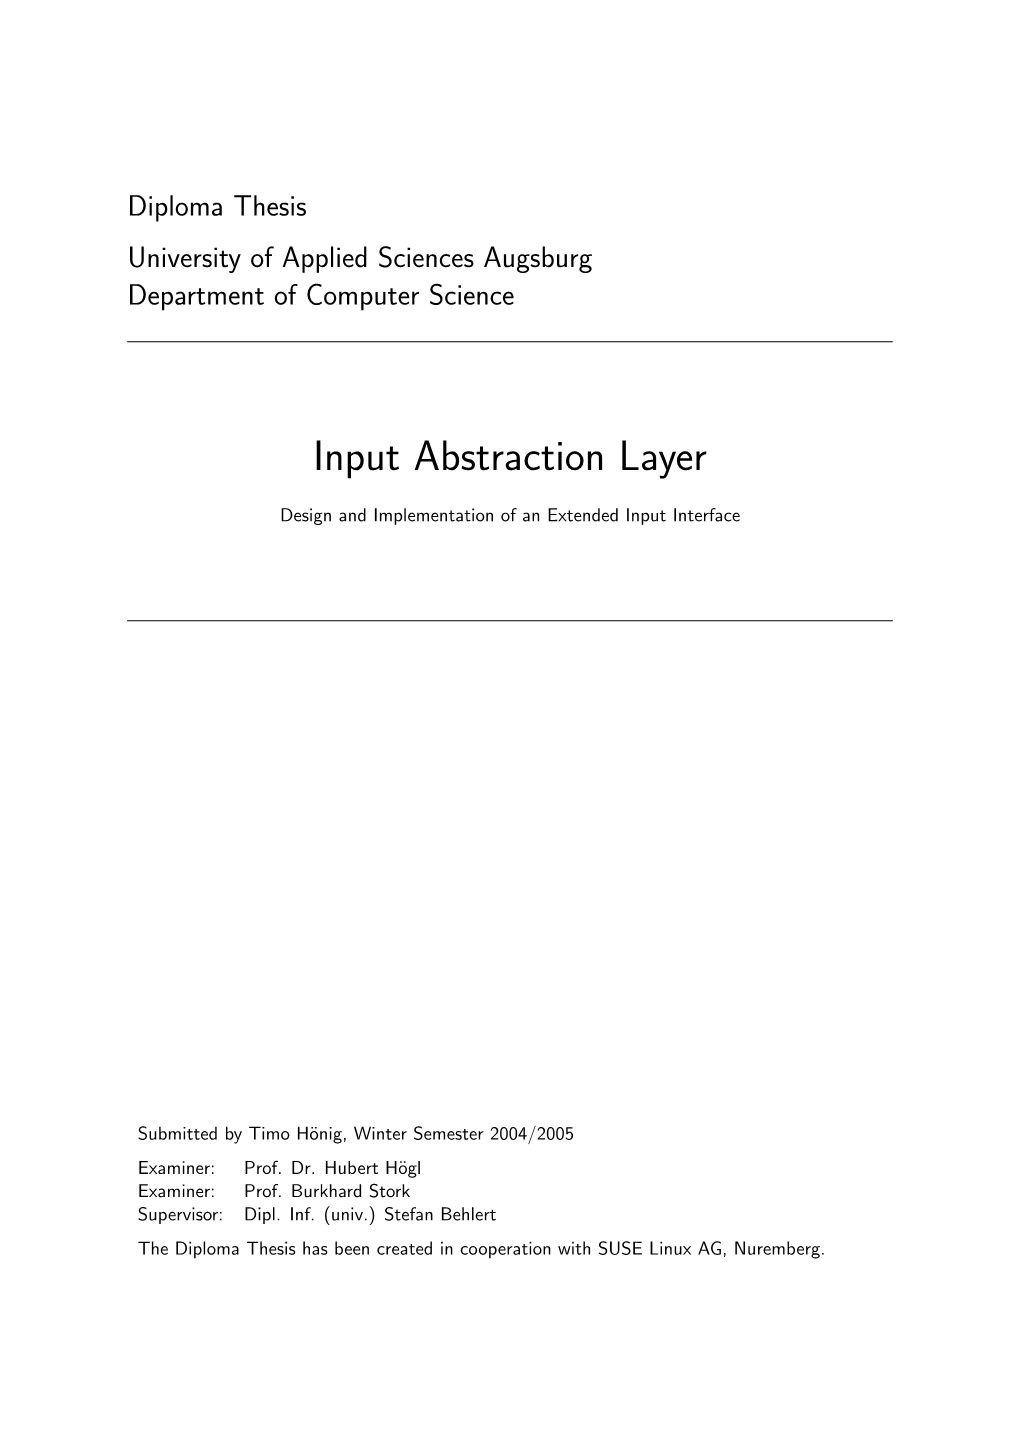 Input Abstraction Layer